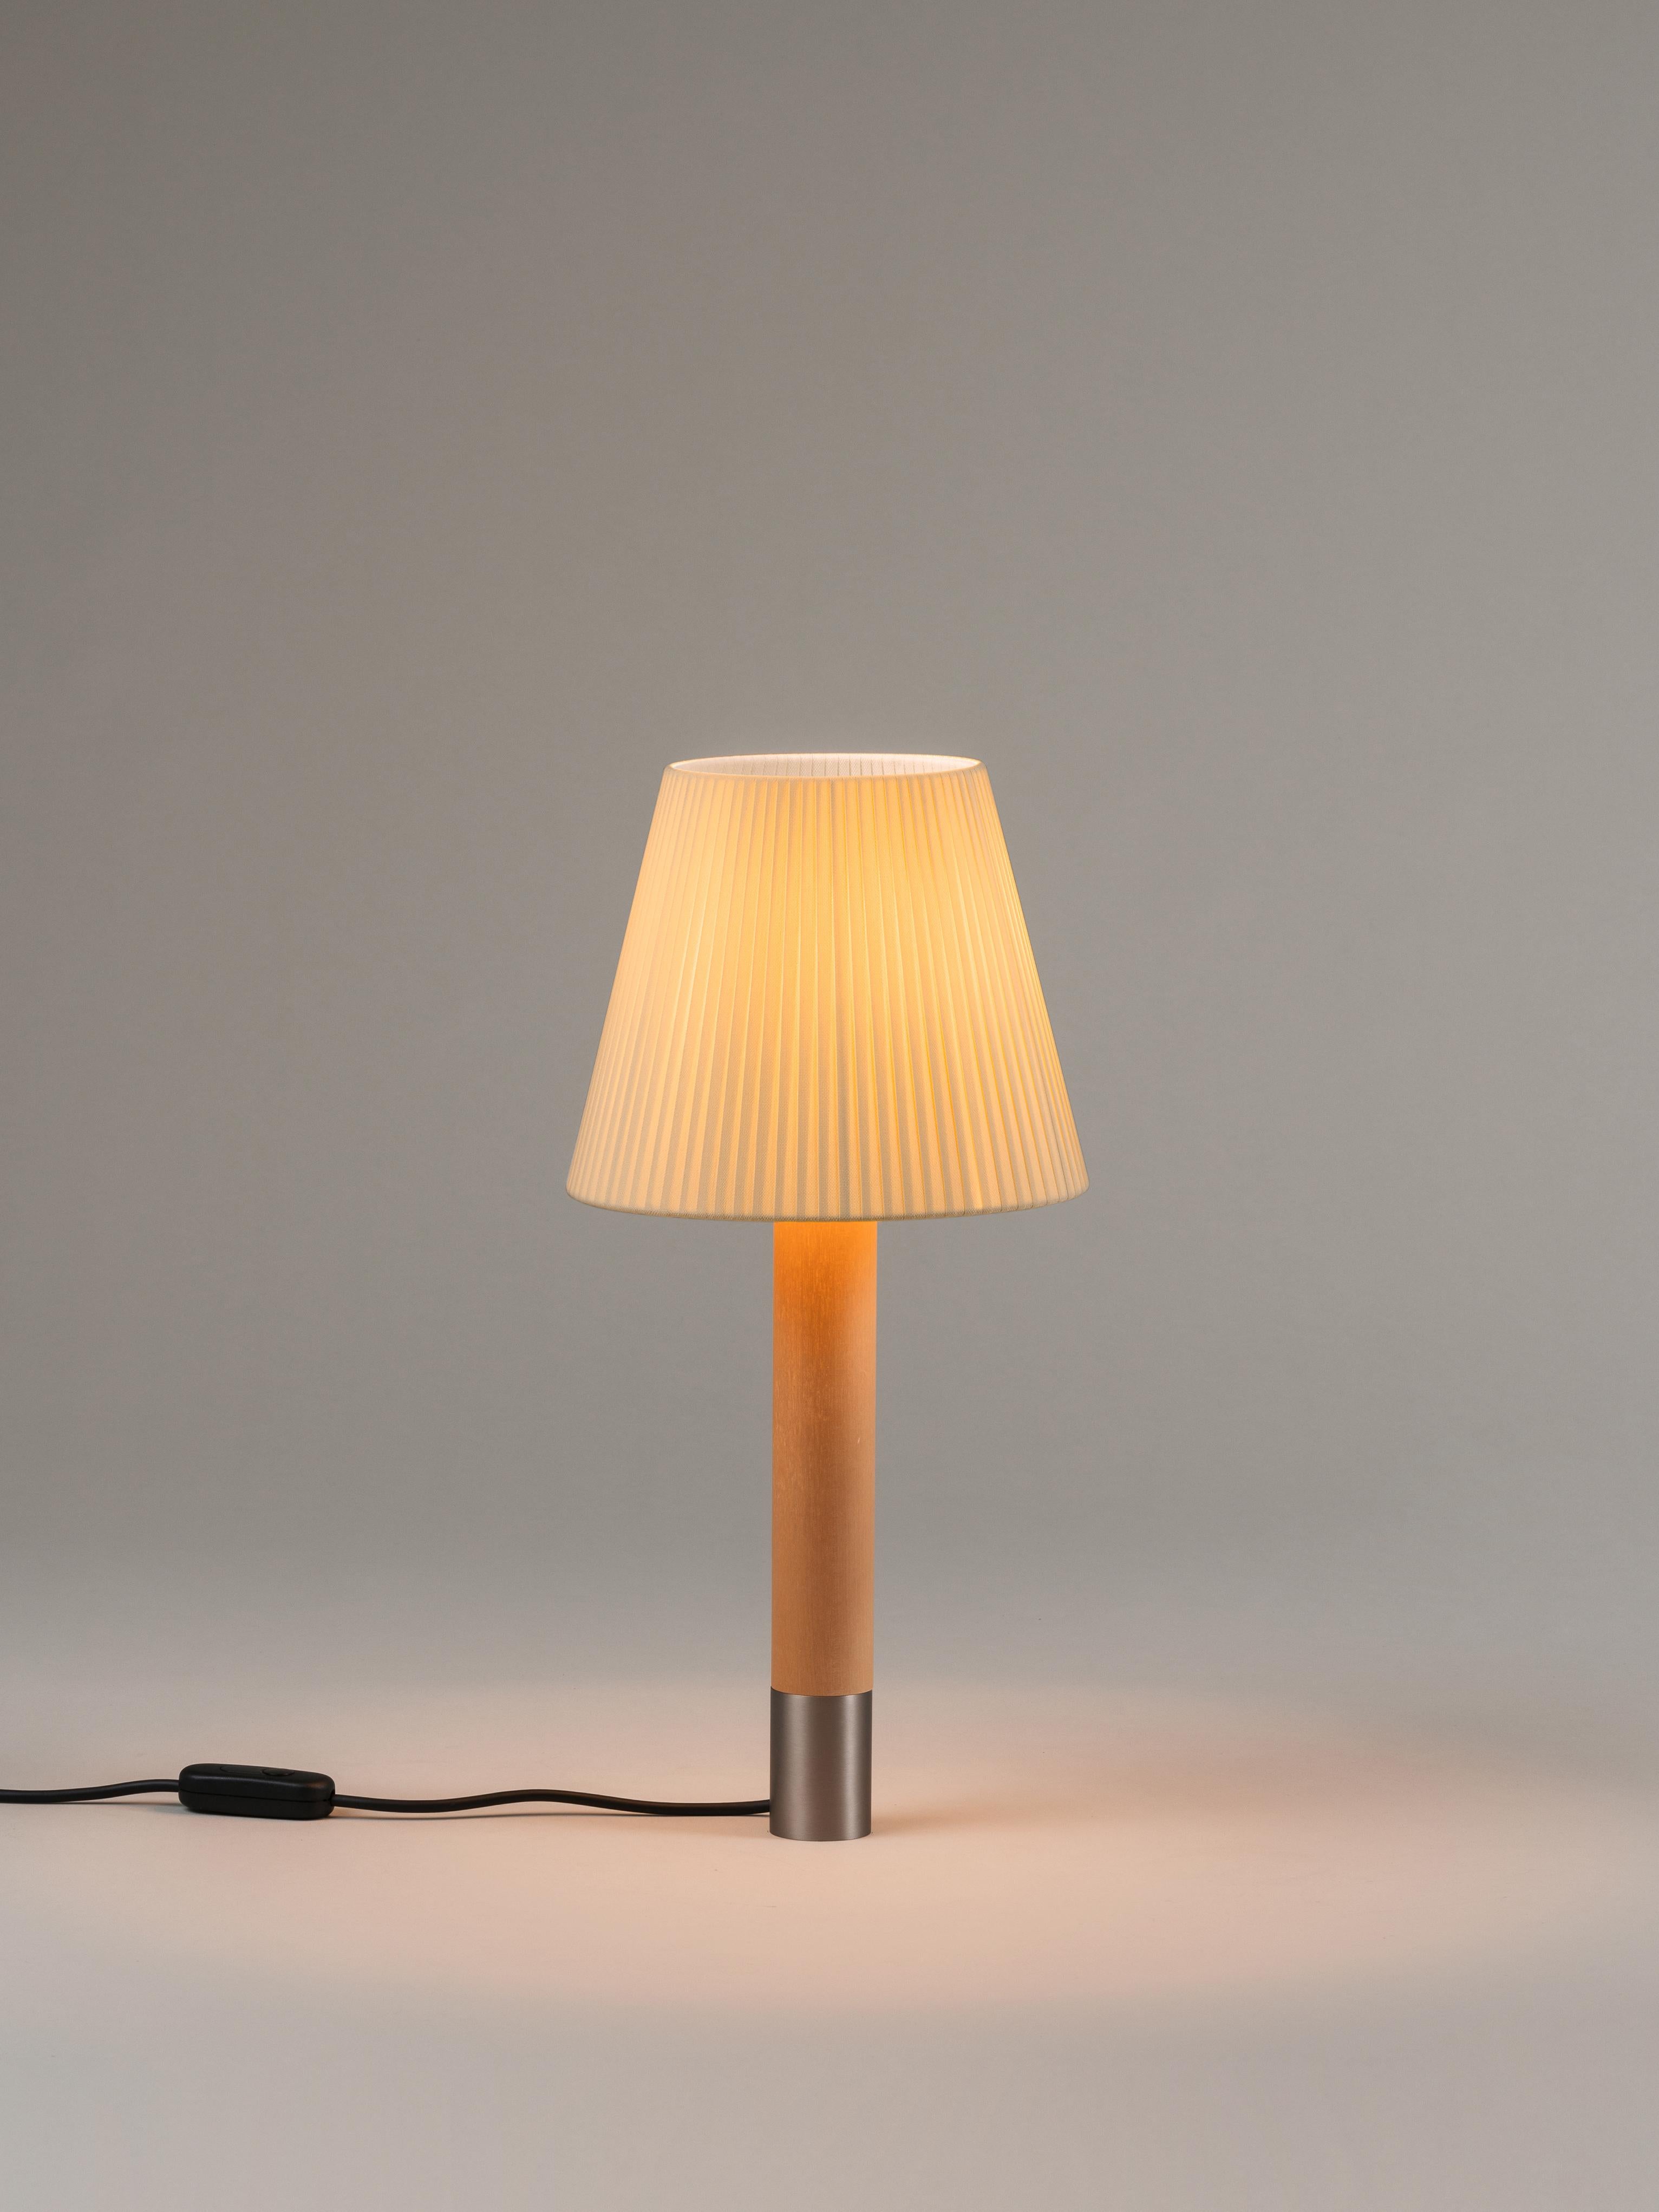 Nickel and Natural Básica M1 table lamp by Santiago Roqueta, Santa & Cole
Dimensions: D 25 x H 52 cm
Materials: Nickel, birch wood, ribbon.
Available in other shade colors and with or without the stabilizing disc.
Available in nickel or